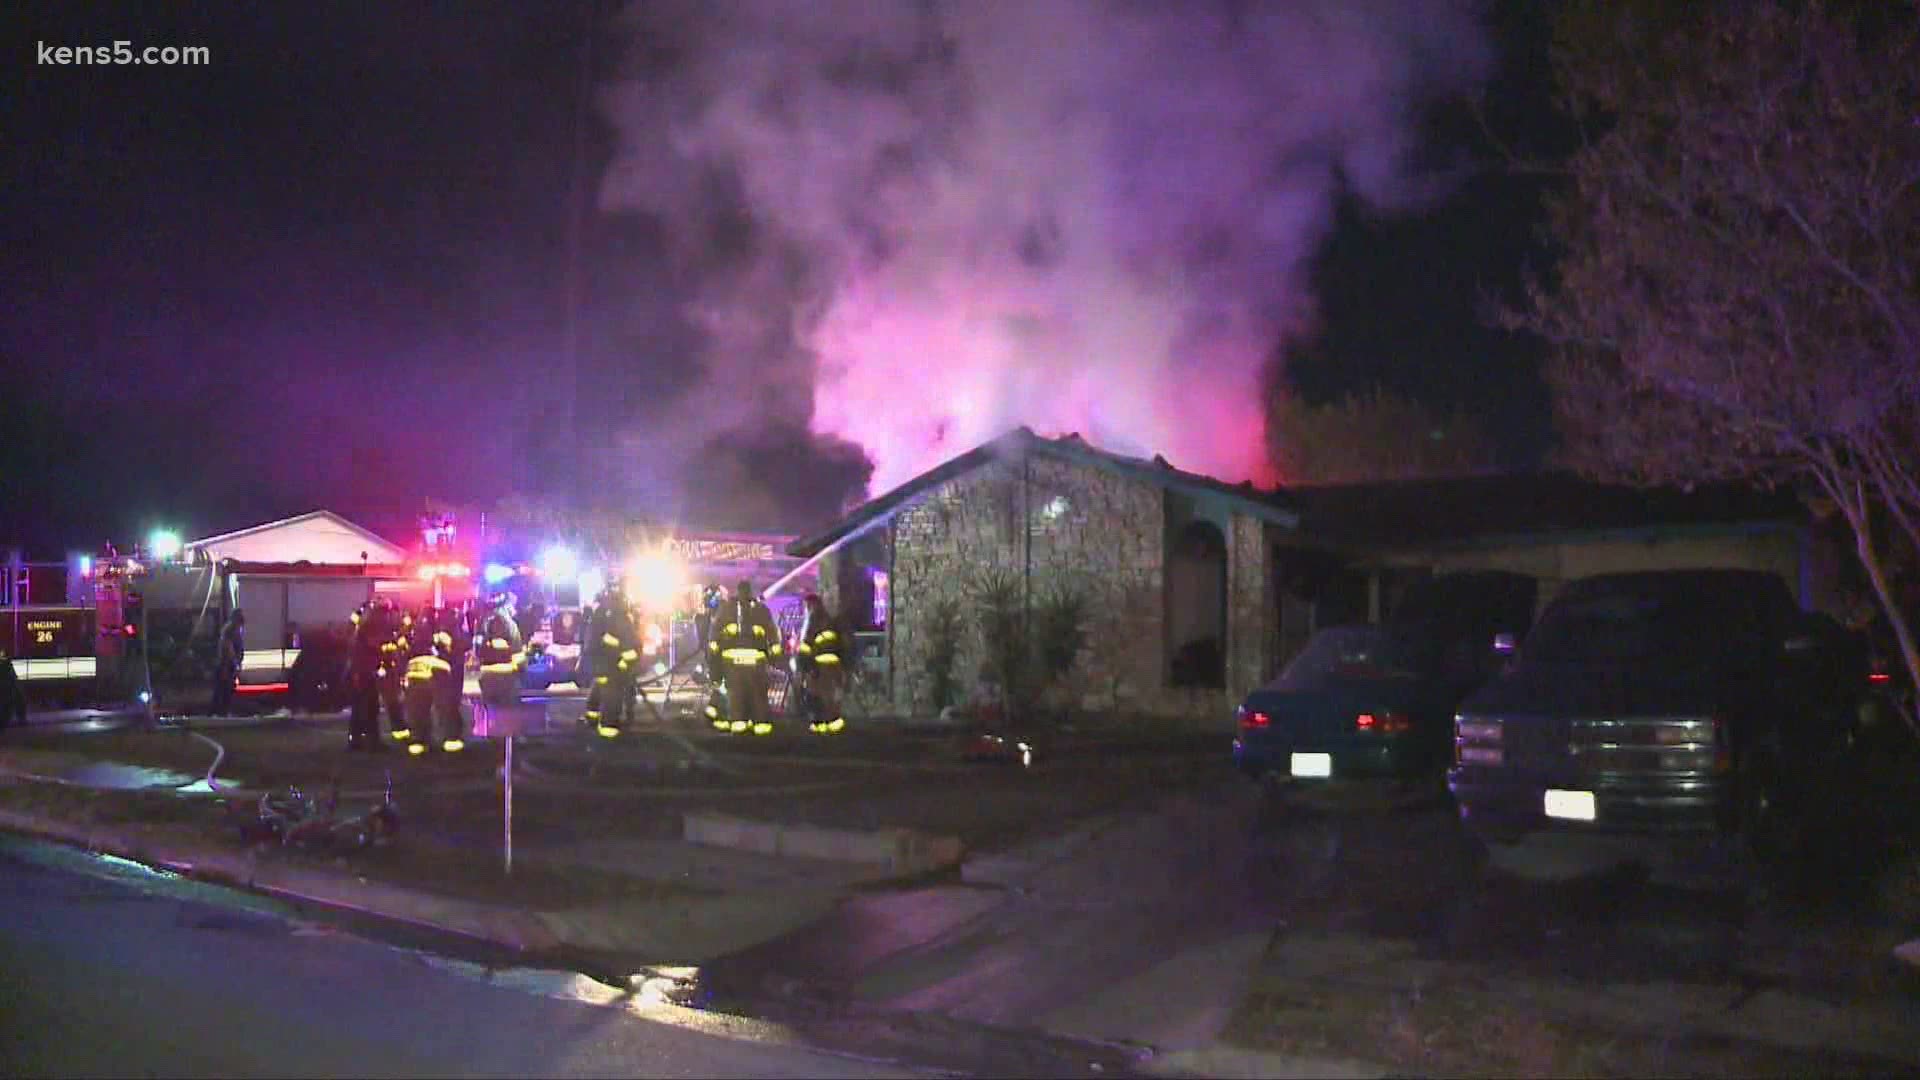 A family escaped with their three dogs from a house fire on the west side, the San Antonio Fire Department said.